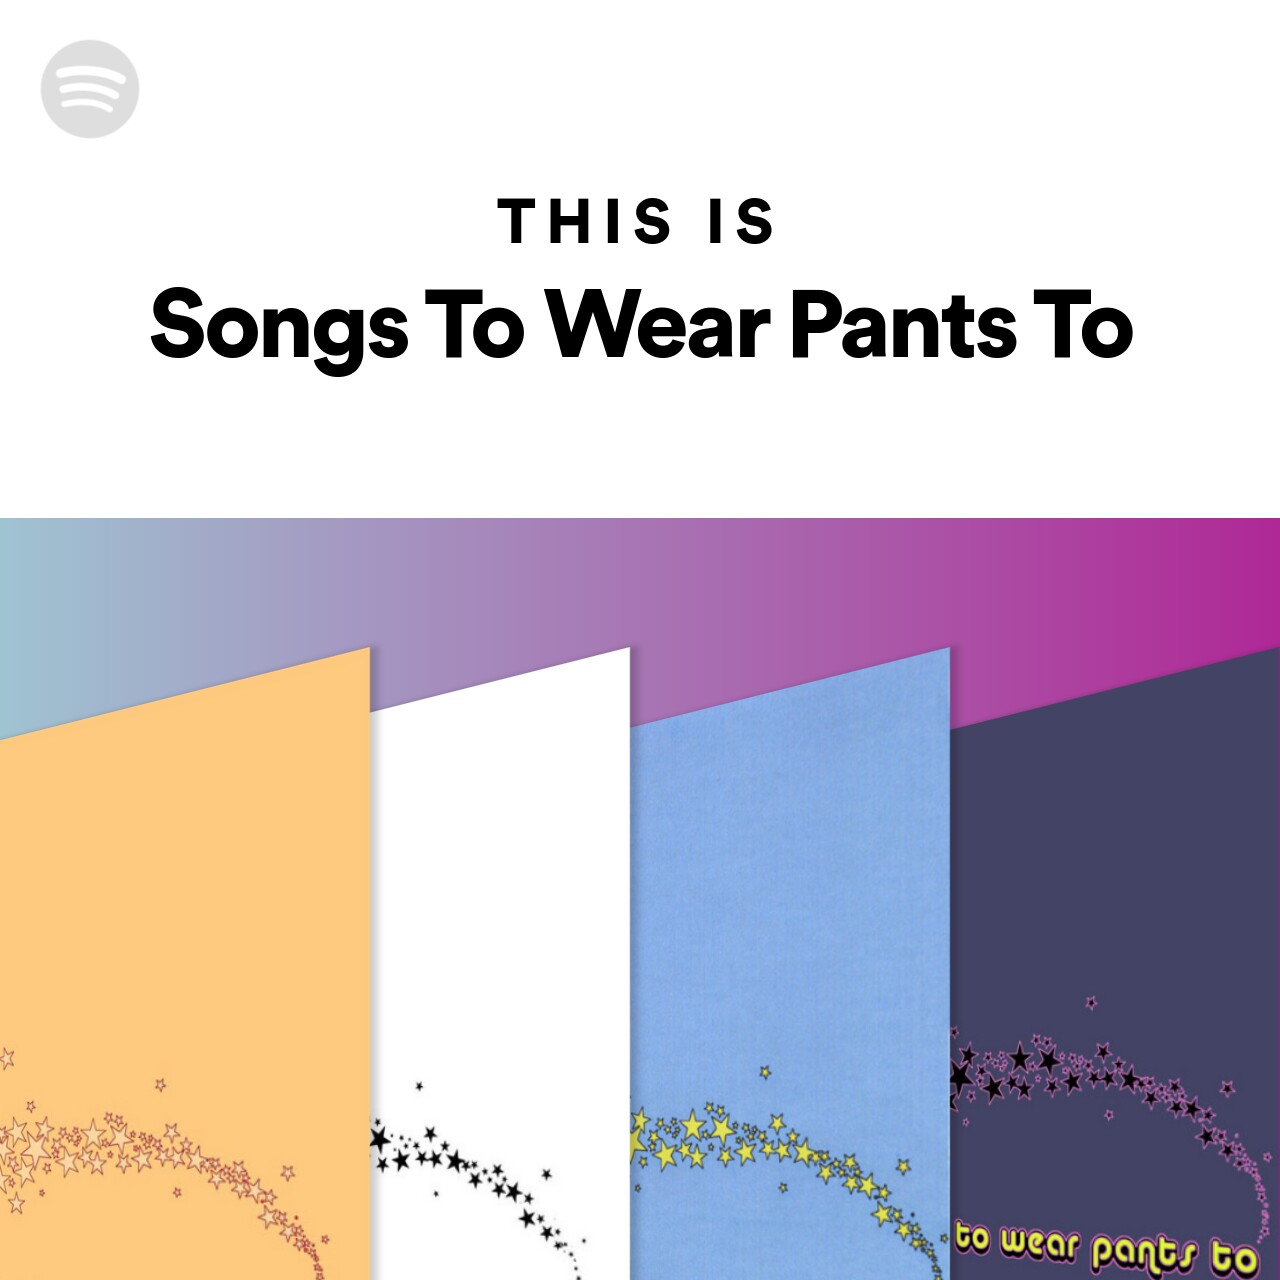 This Is Songs To Wear Pants To